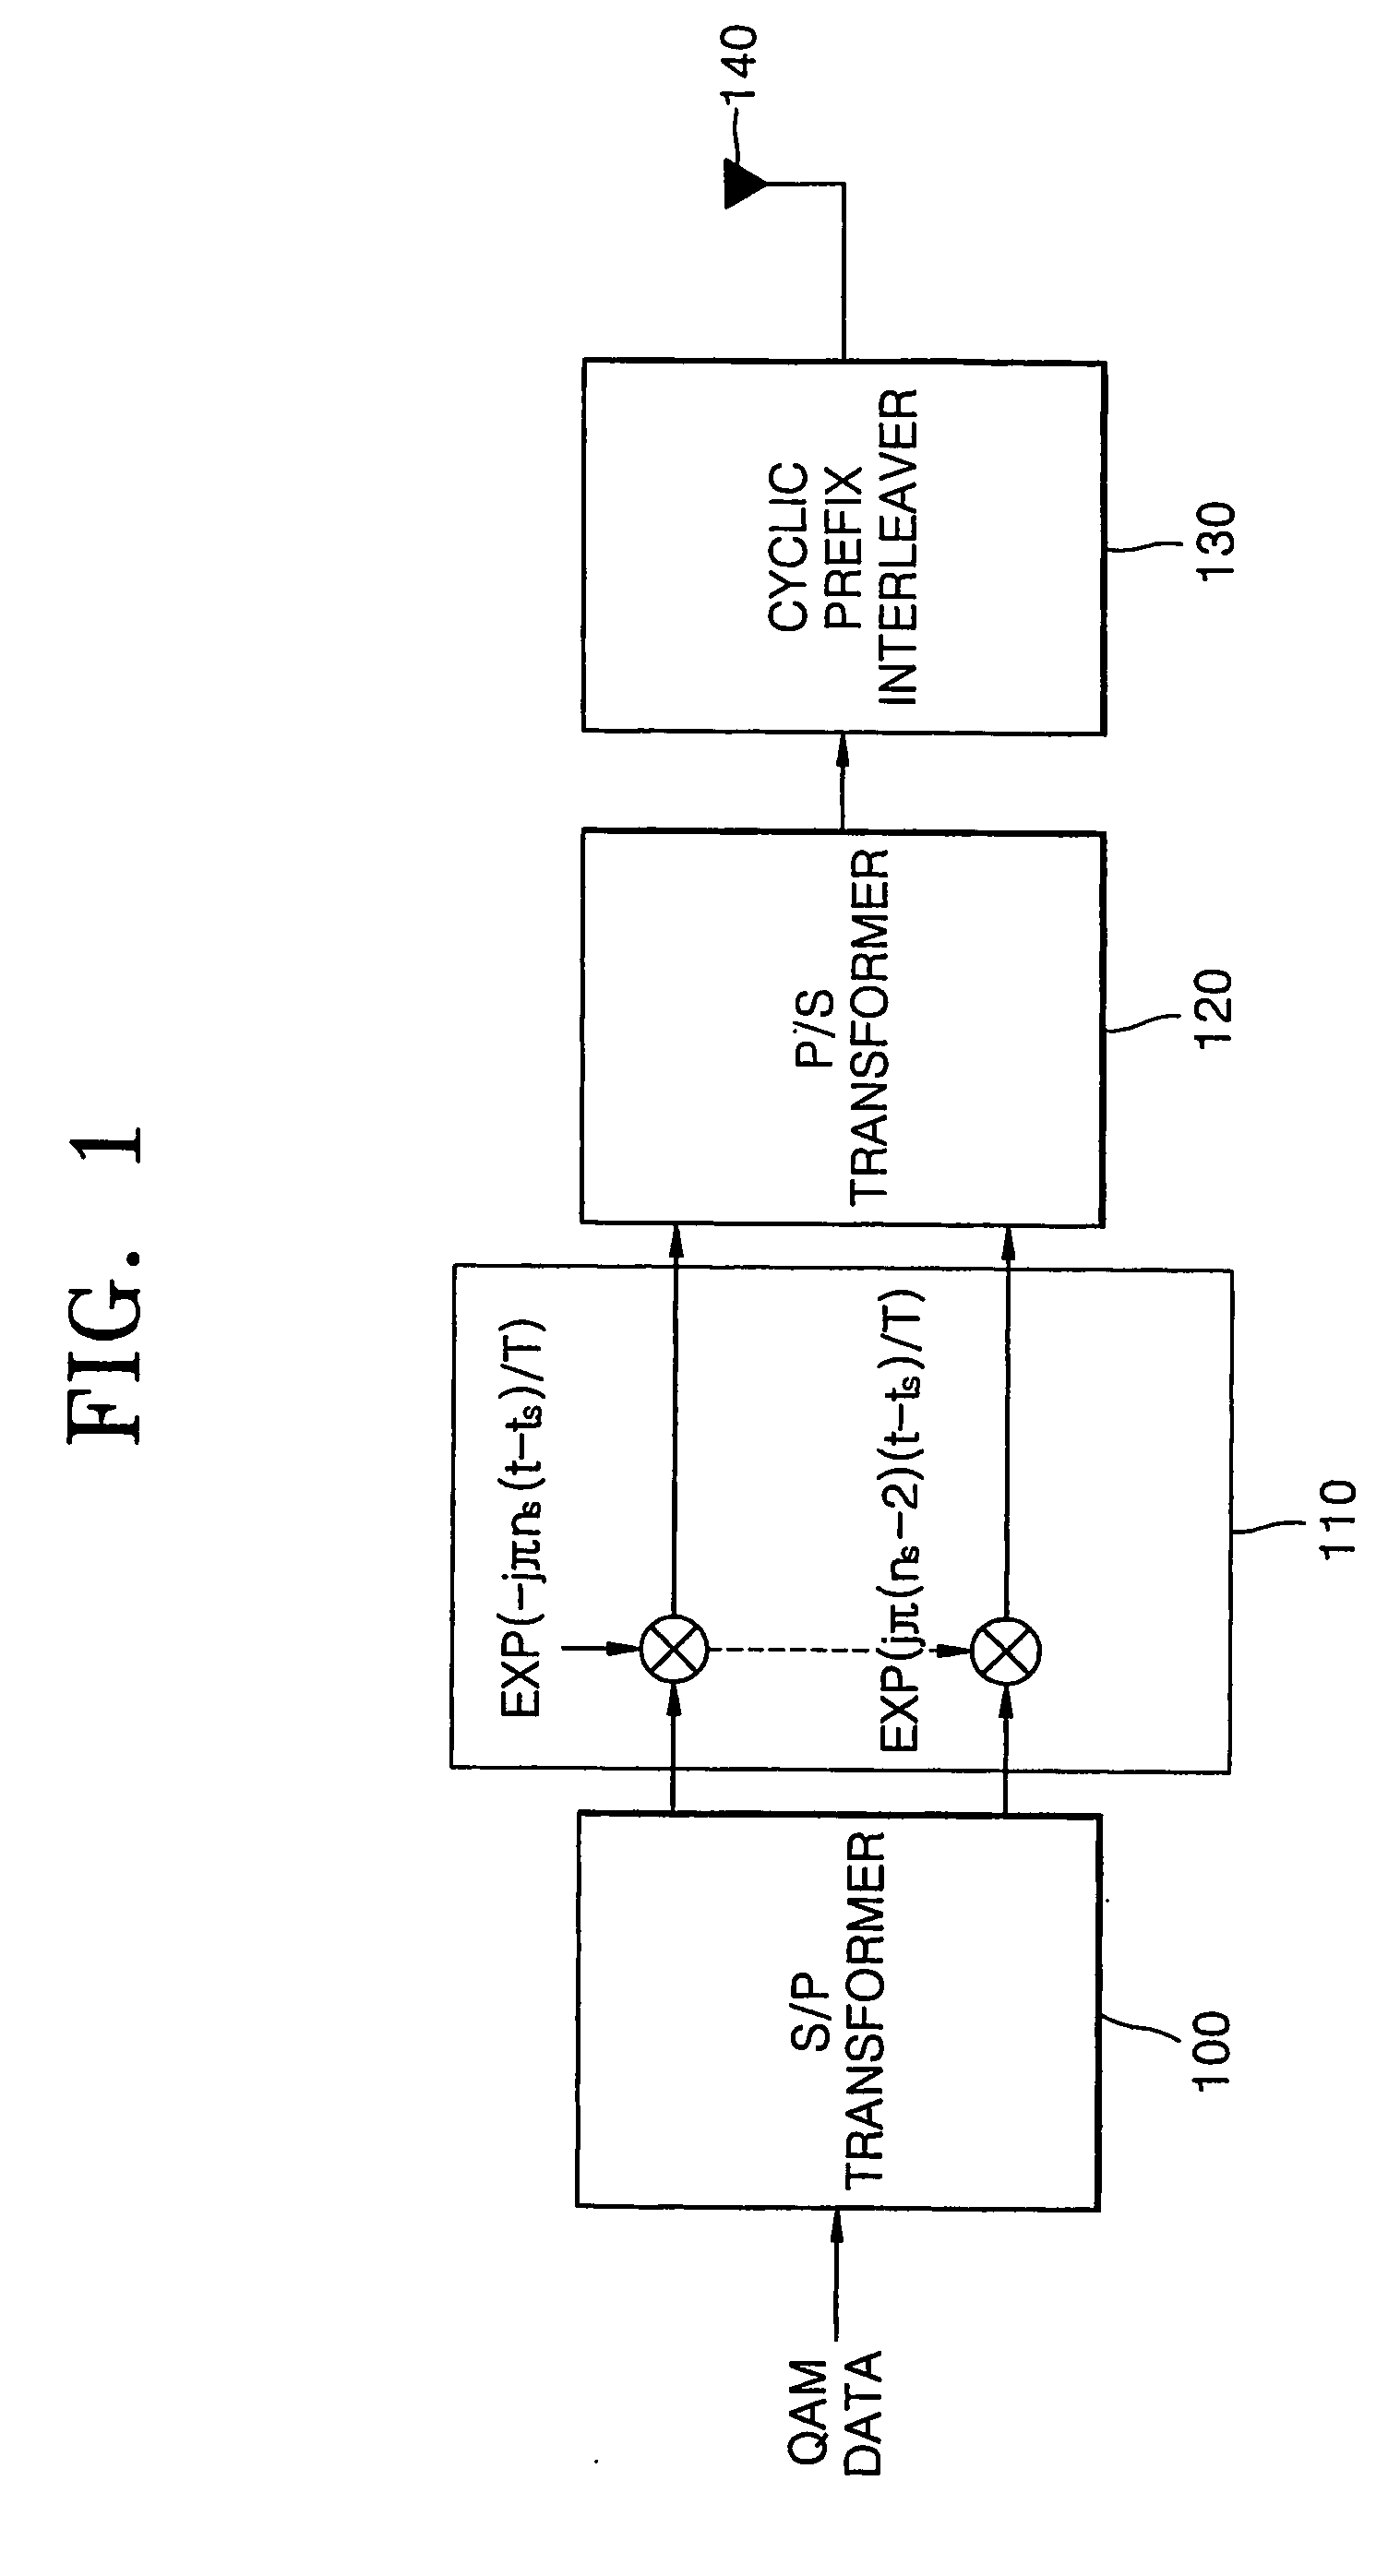 Method of reducing papr in multiple antenna ofdm communication system and multiple antenna ofdm communication system using the method